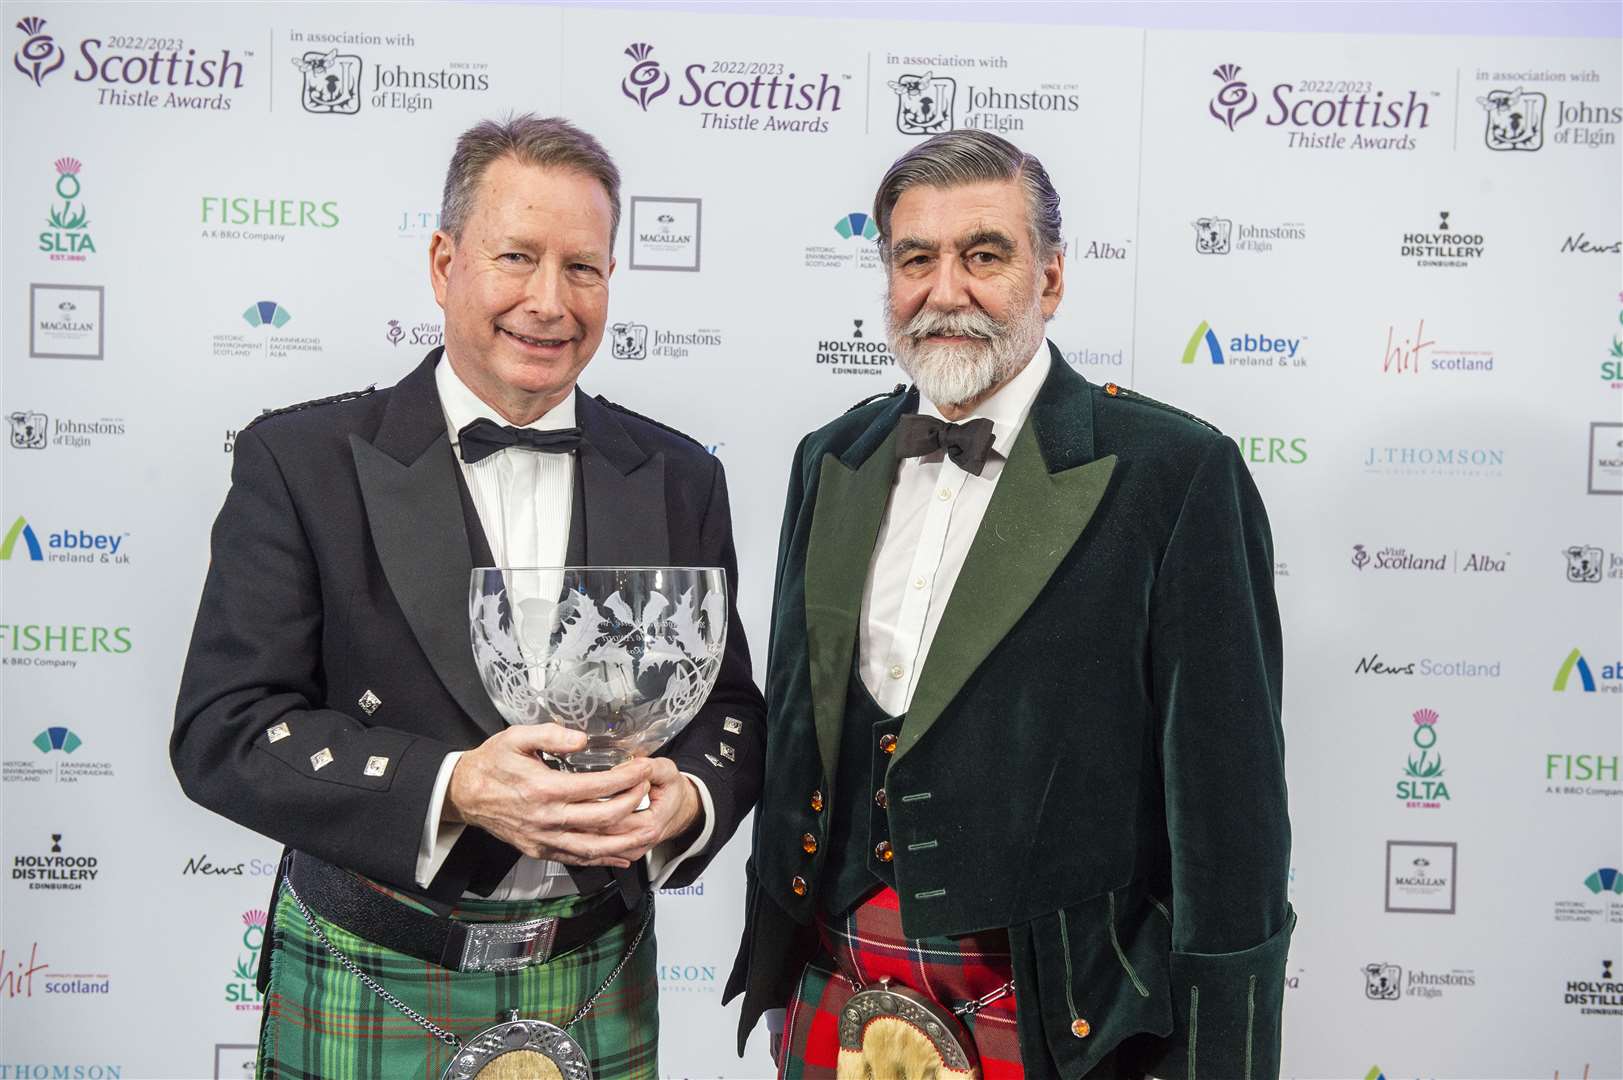 Calum Ross (left) received the Silver Thistle award from Lord Thurso earlier this year.